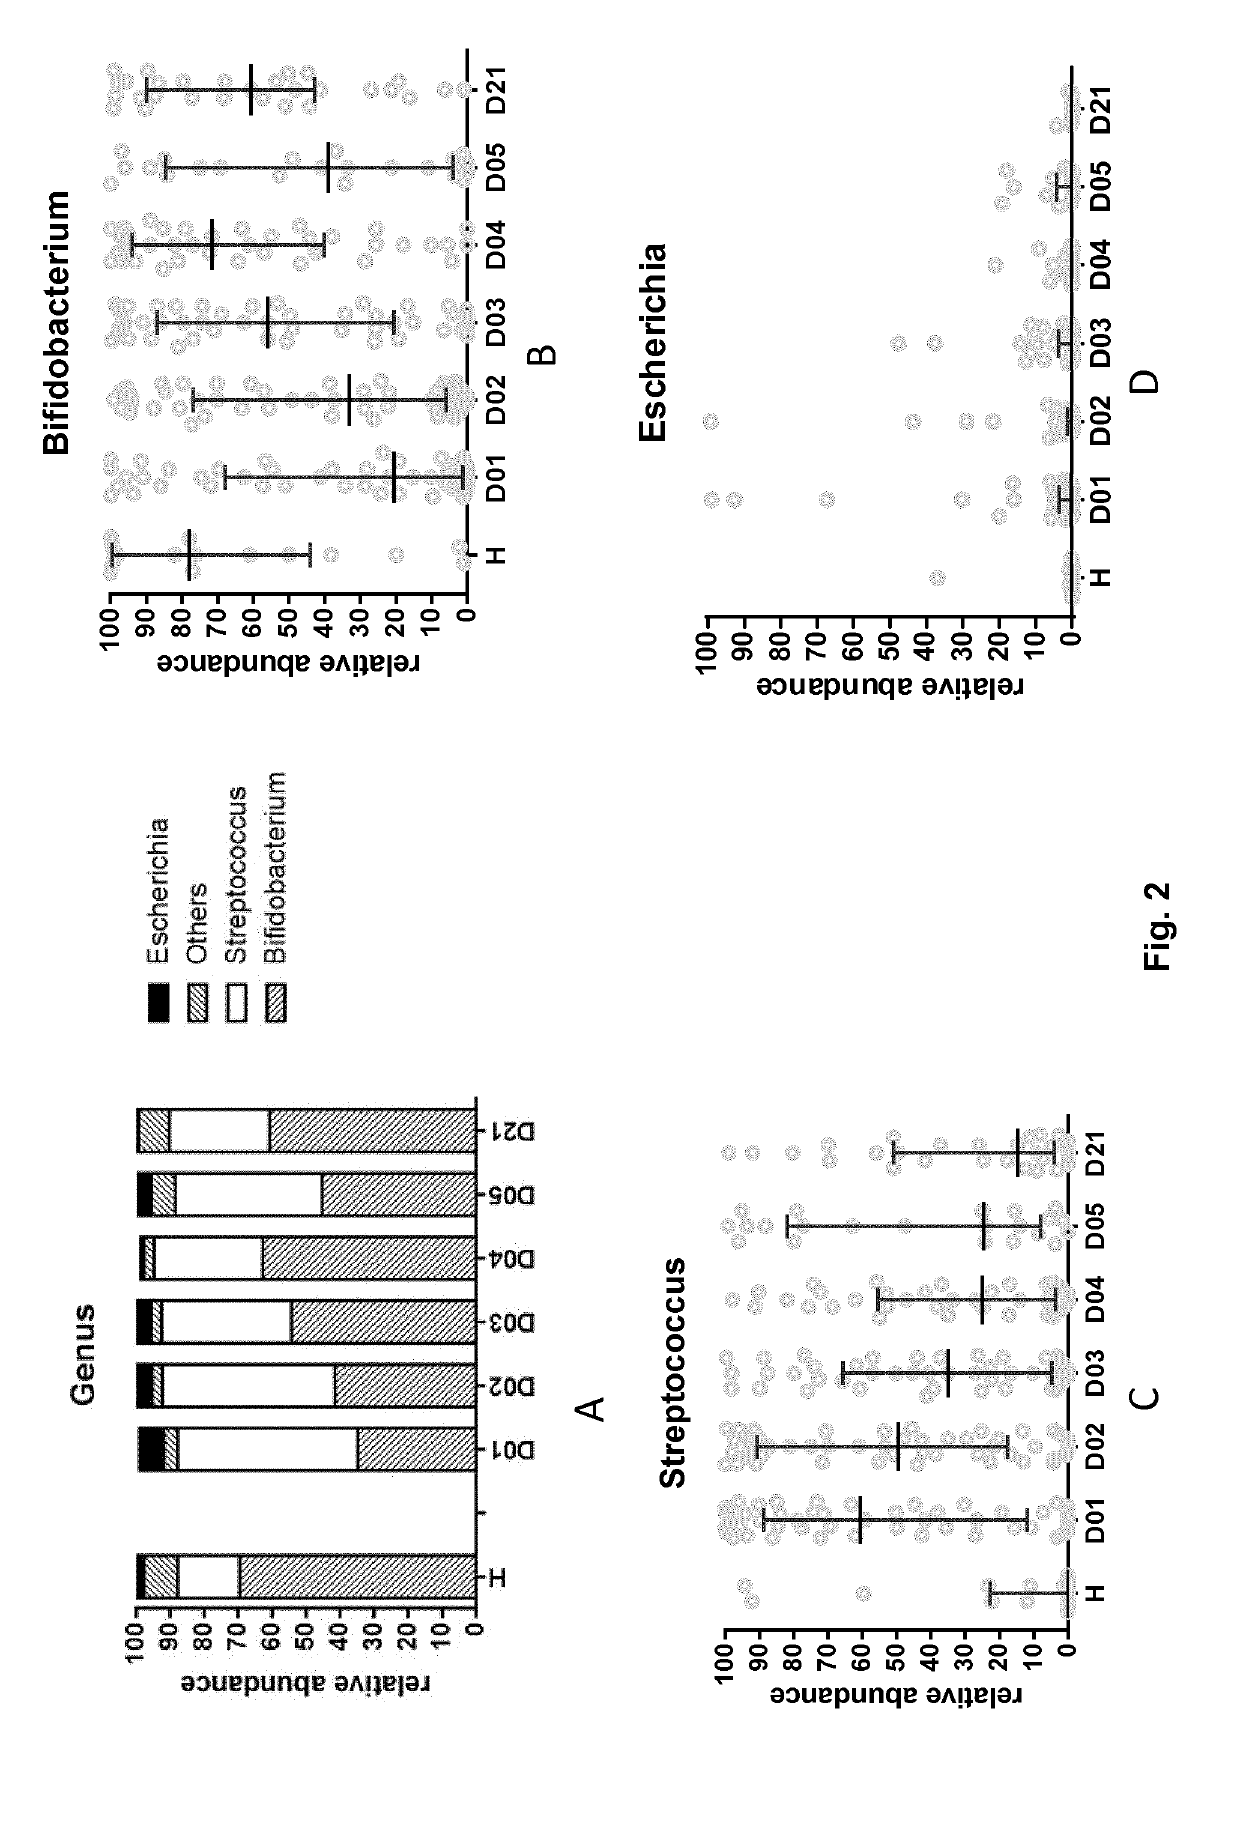 Nutritional compositions with 2fl and lnnt for use in preventing and/or treating non-rotavirus diarrhea by acting on the gut microbiota dysbiosis